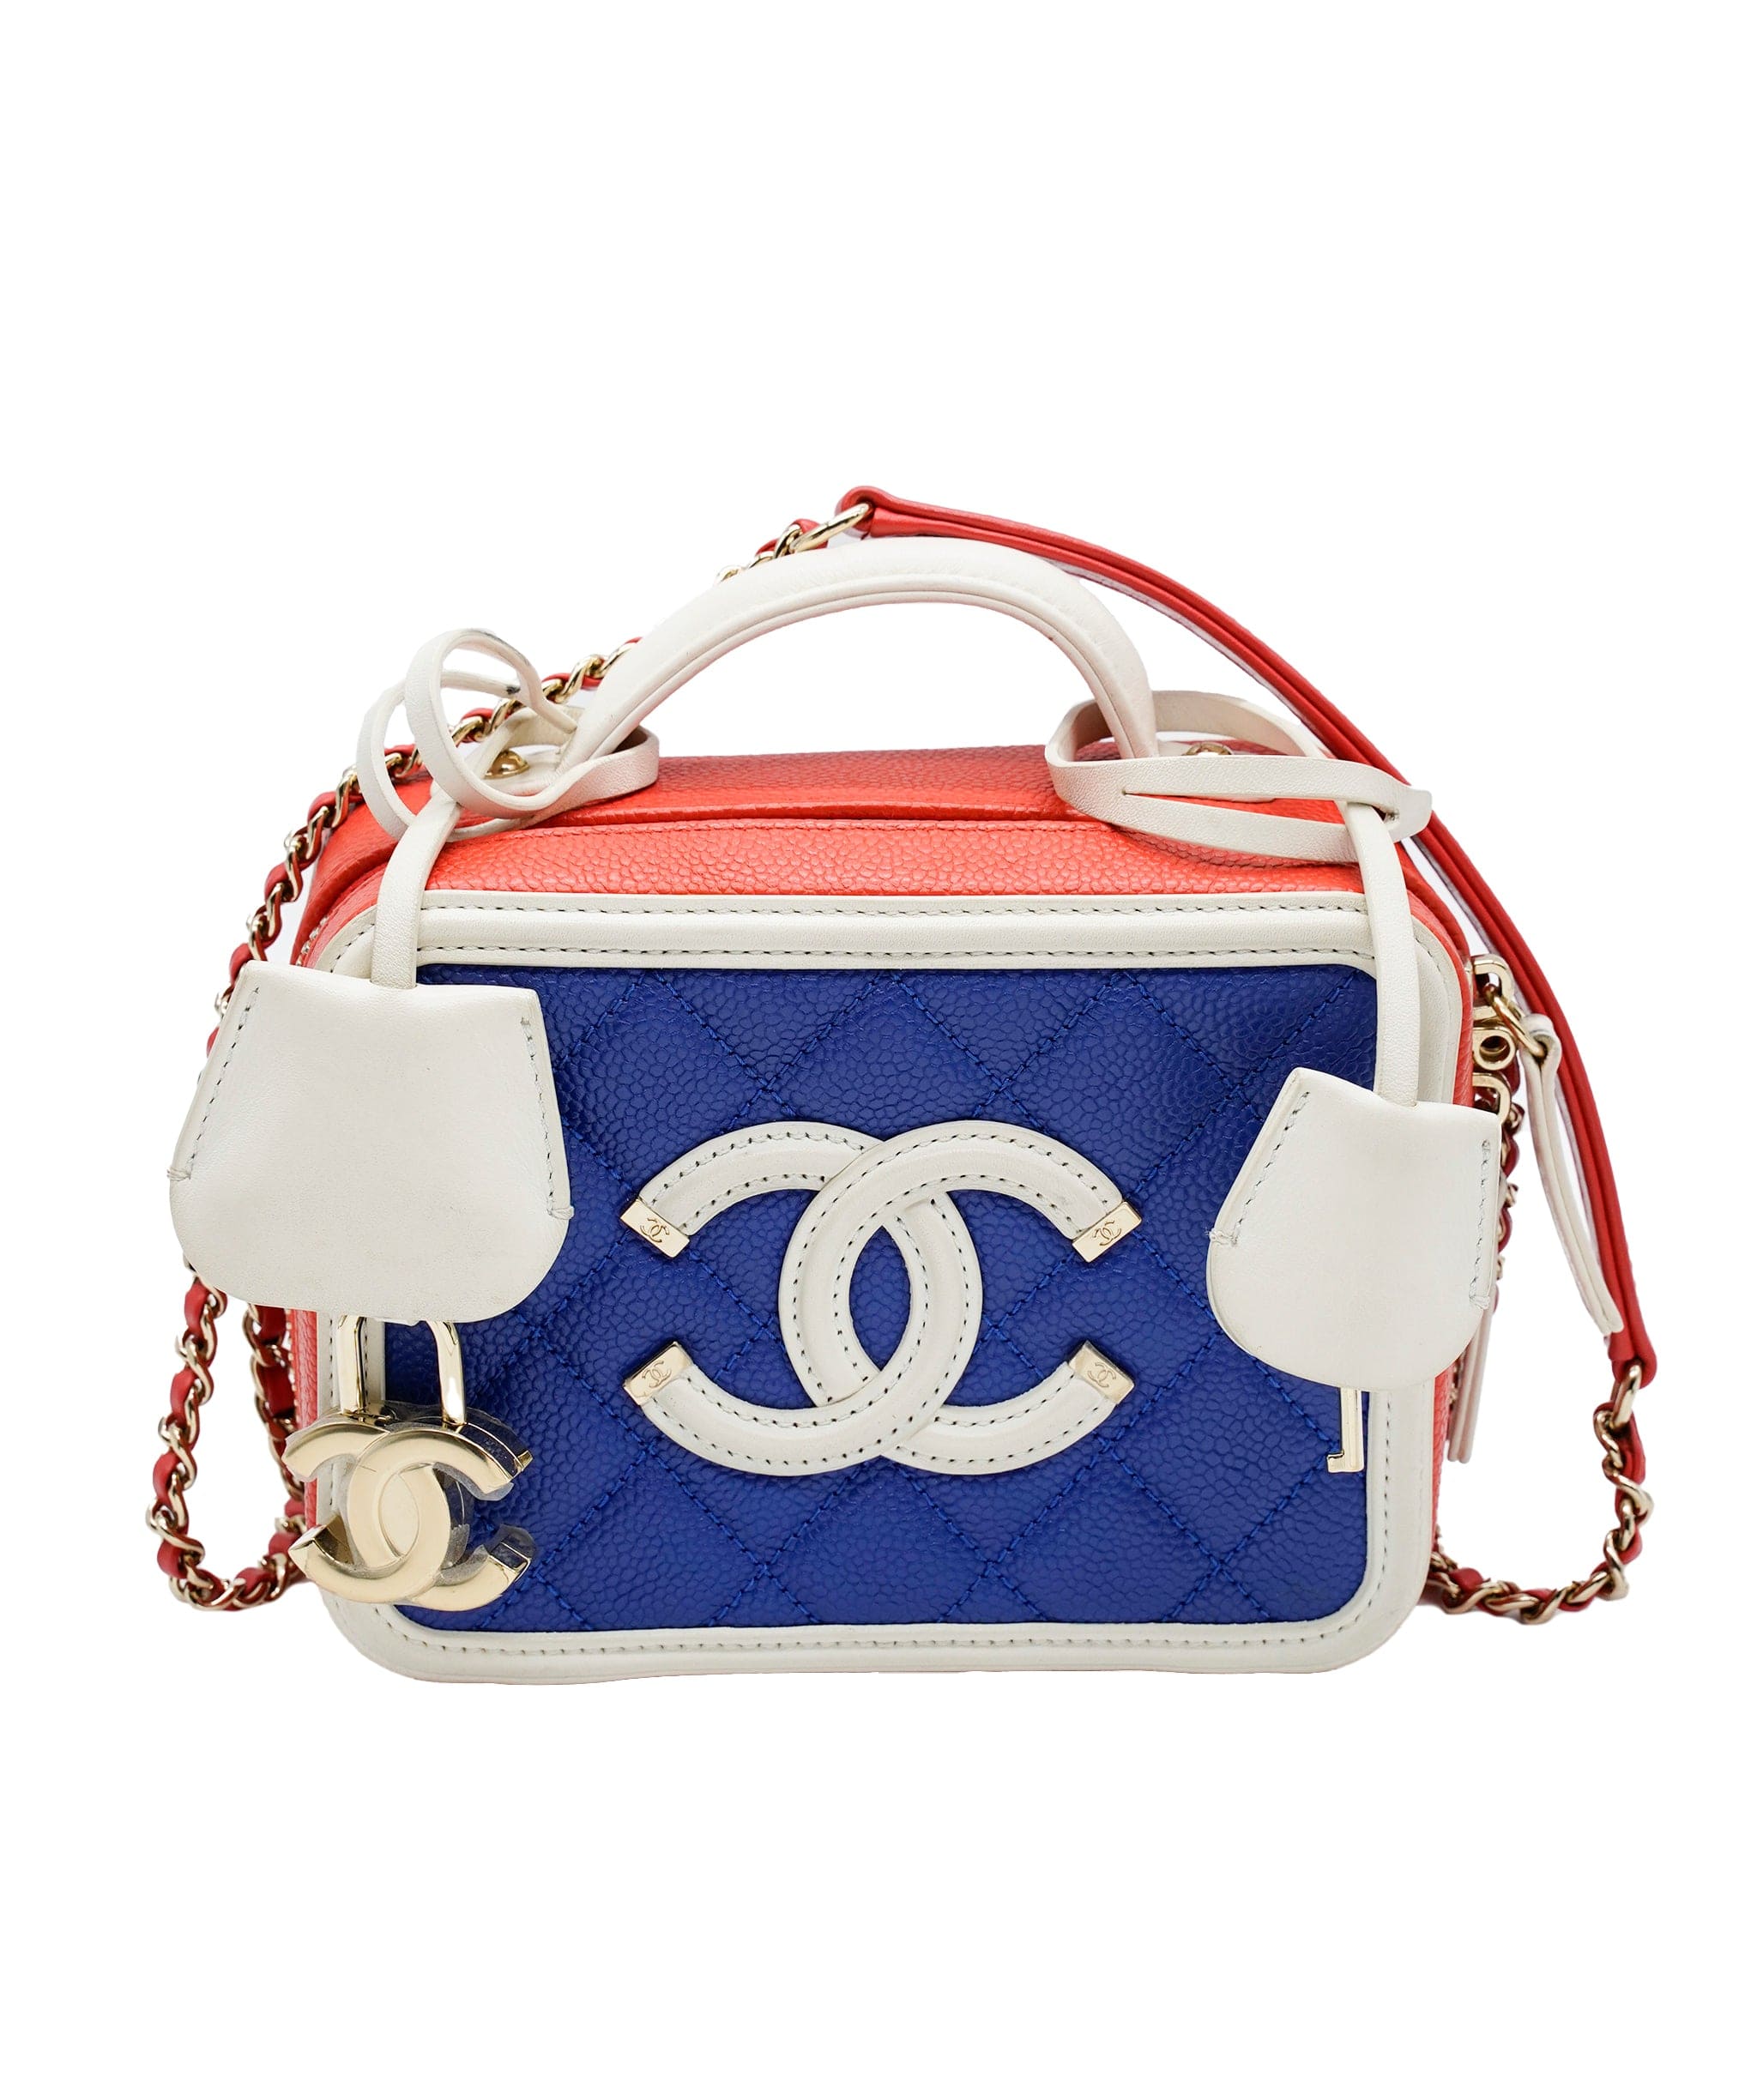 Chanel Red/White/Blue Caviar Quilted Small CC Filigree Vanity